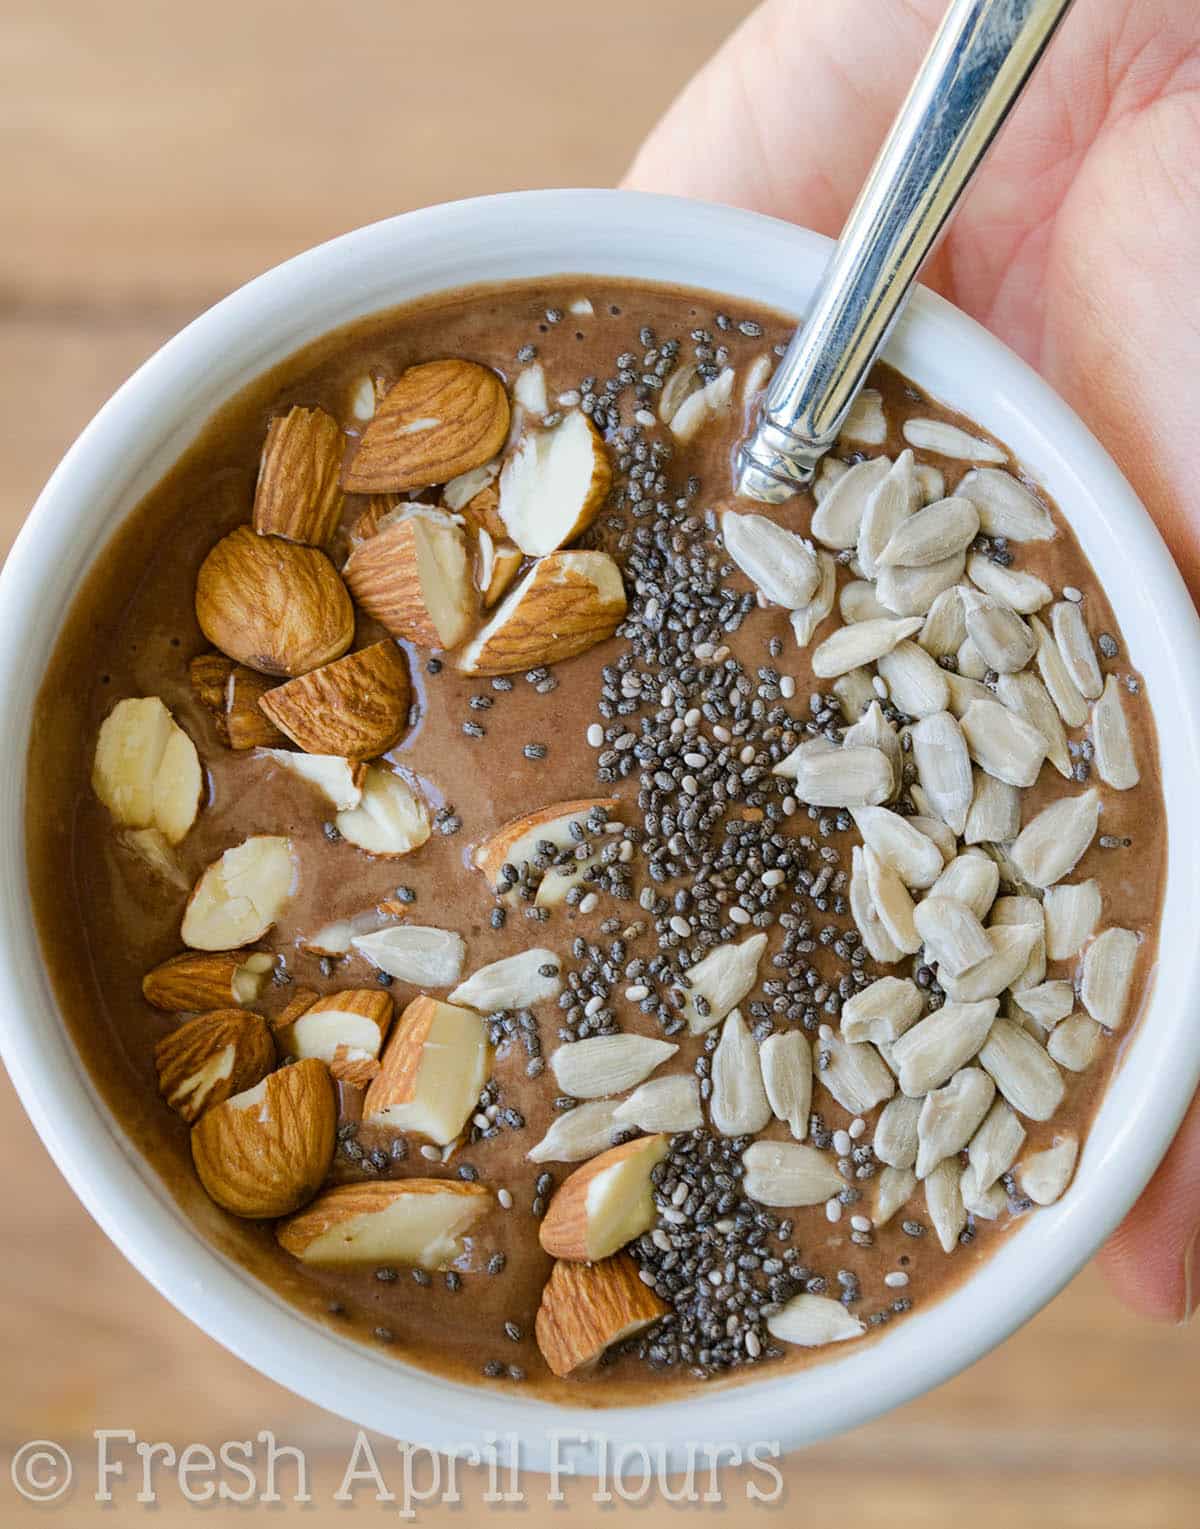 Chocolate Peanut Butter Smoothie Bowl: Thick and creamy smoothie bowl that makes you feel like you're eating a bowl of chocolate ice cream! Add any of your favorite toppings.